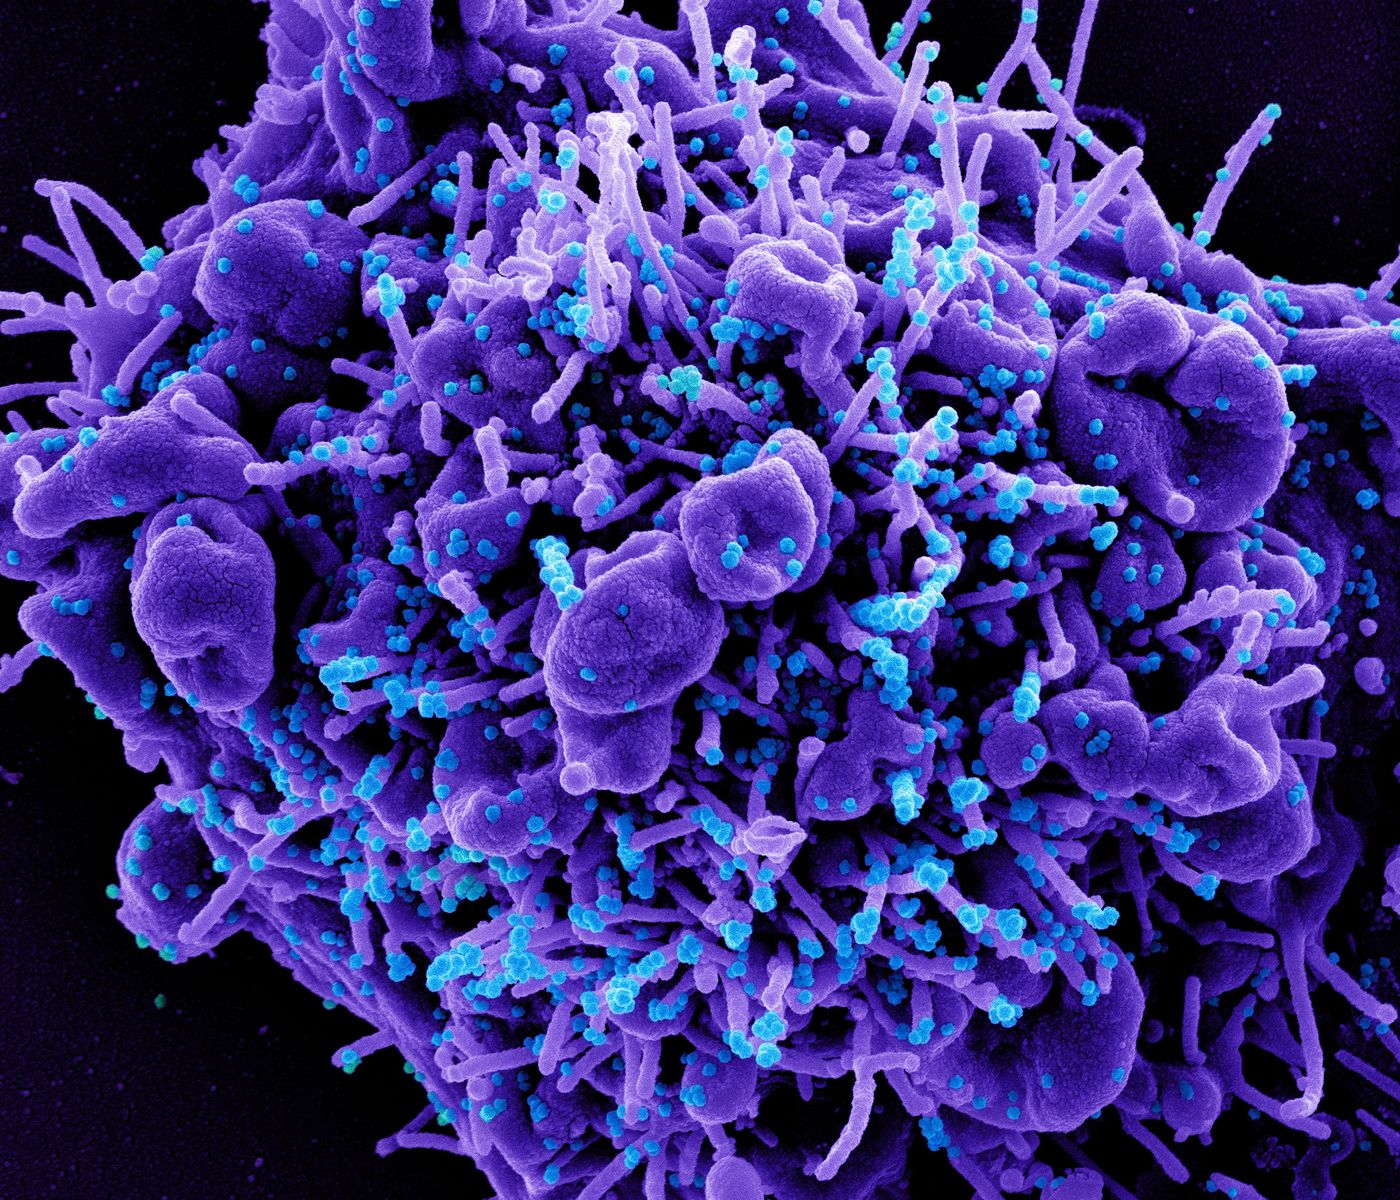 Colorized scanning electron micrograph of an apoptotic cell (purple) infected with SARS-COV-2 virus particles (blue), isolated from a patient sample. Image captured at the NIAID Integrated Research Facility (IRF) in Fort Detrick, Maryland. Credit: NIAID